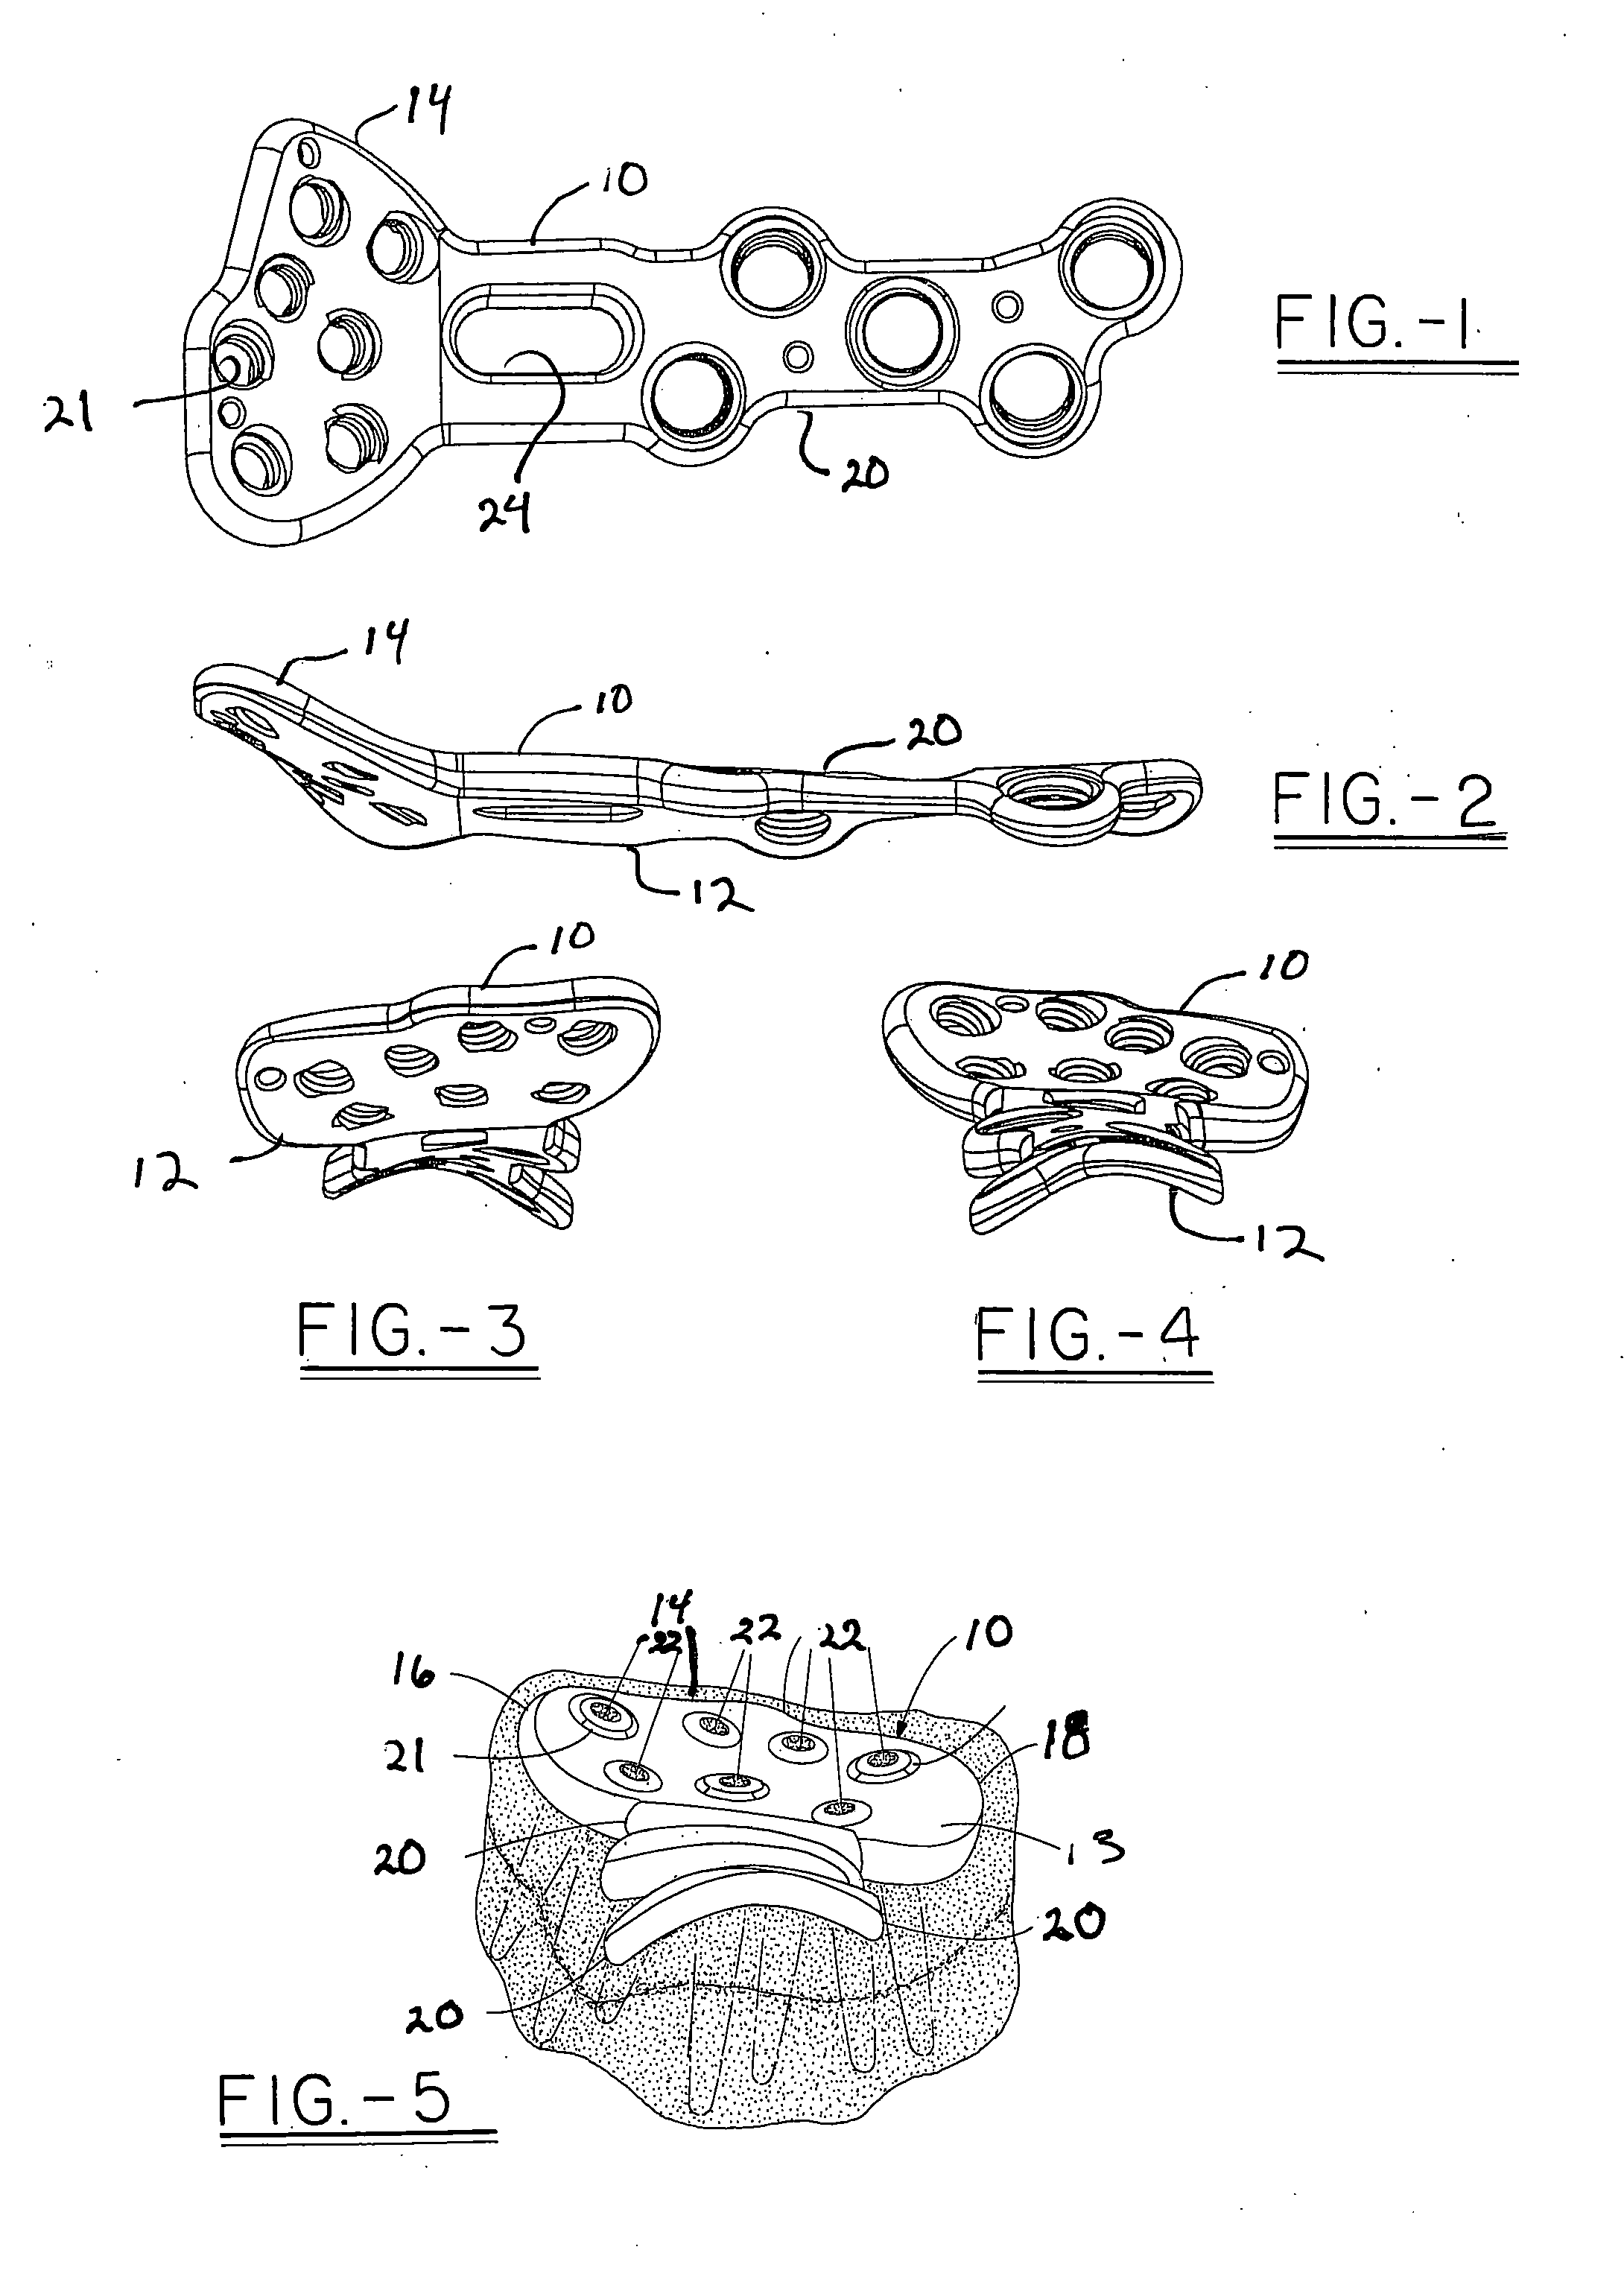 Method of designing orthopedic plates and plates made in accordance with the method